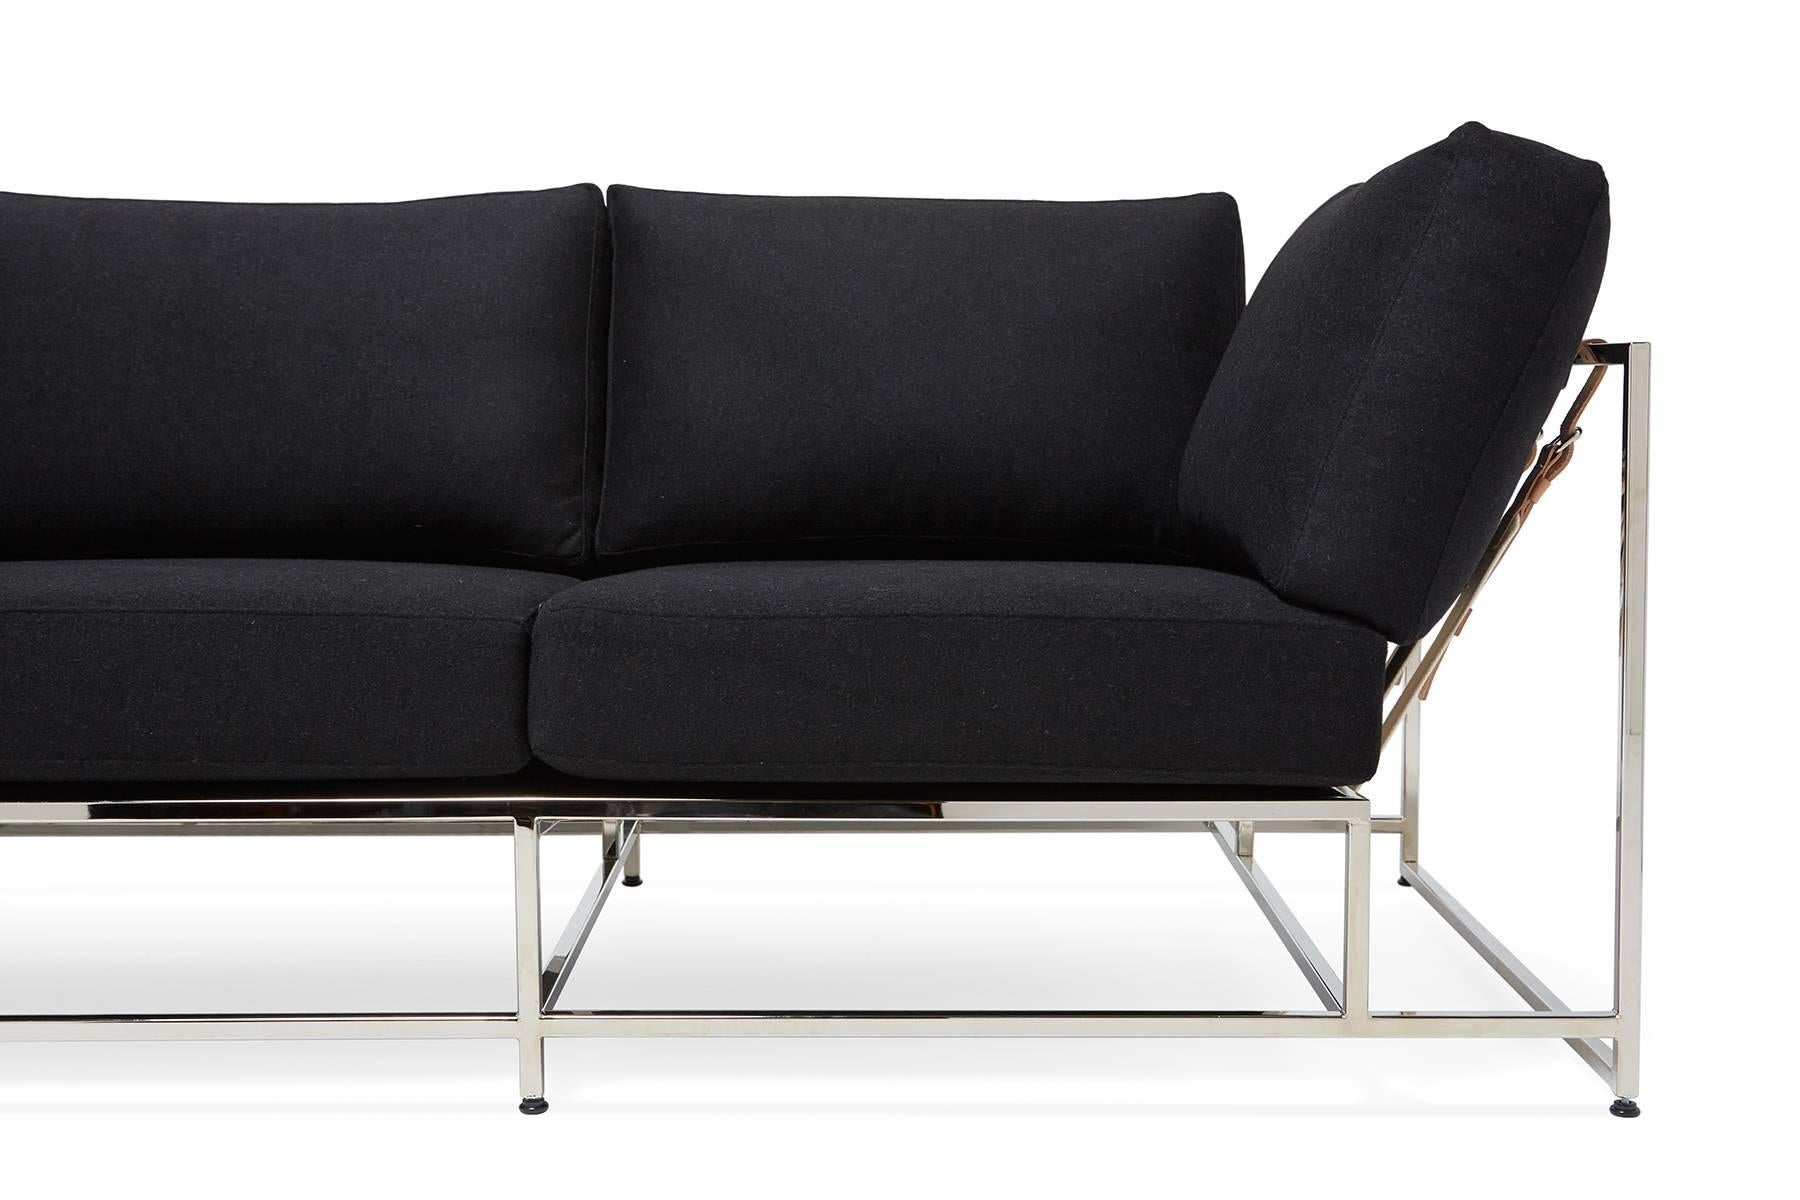 Black Wool and Polished Nickel Sofa In New Condition For Sale In Los Angeles, CA